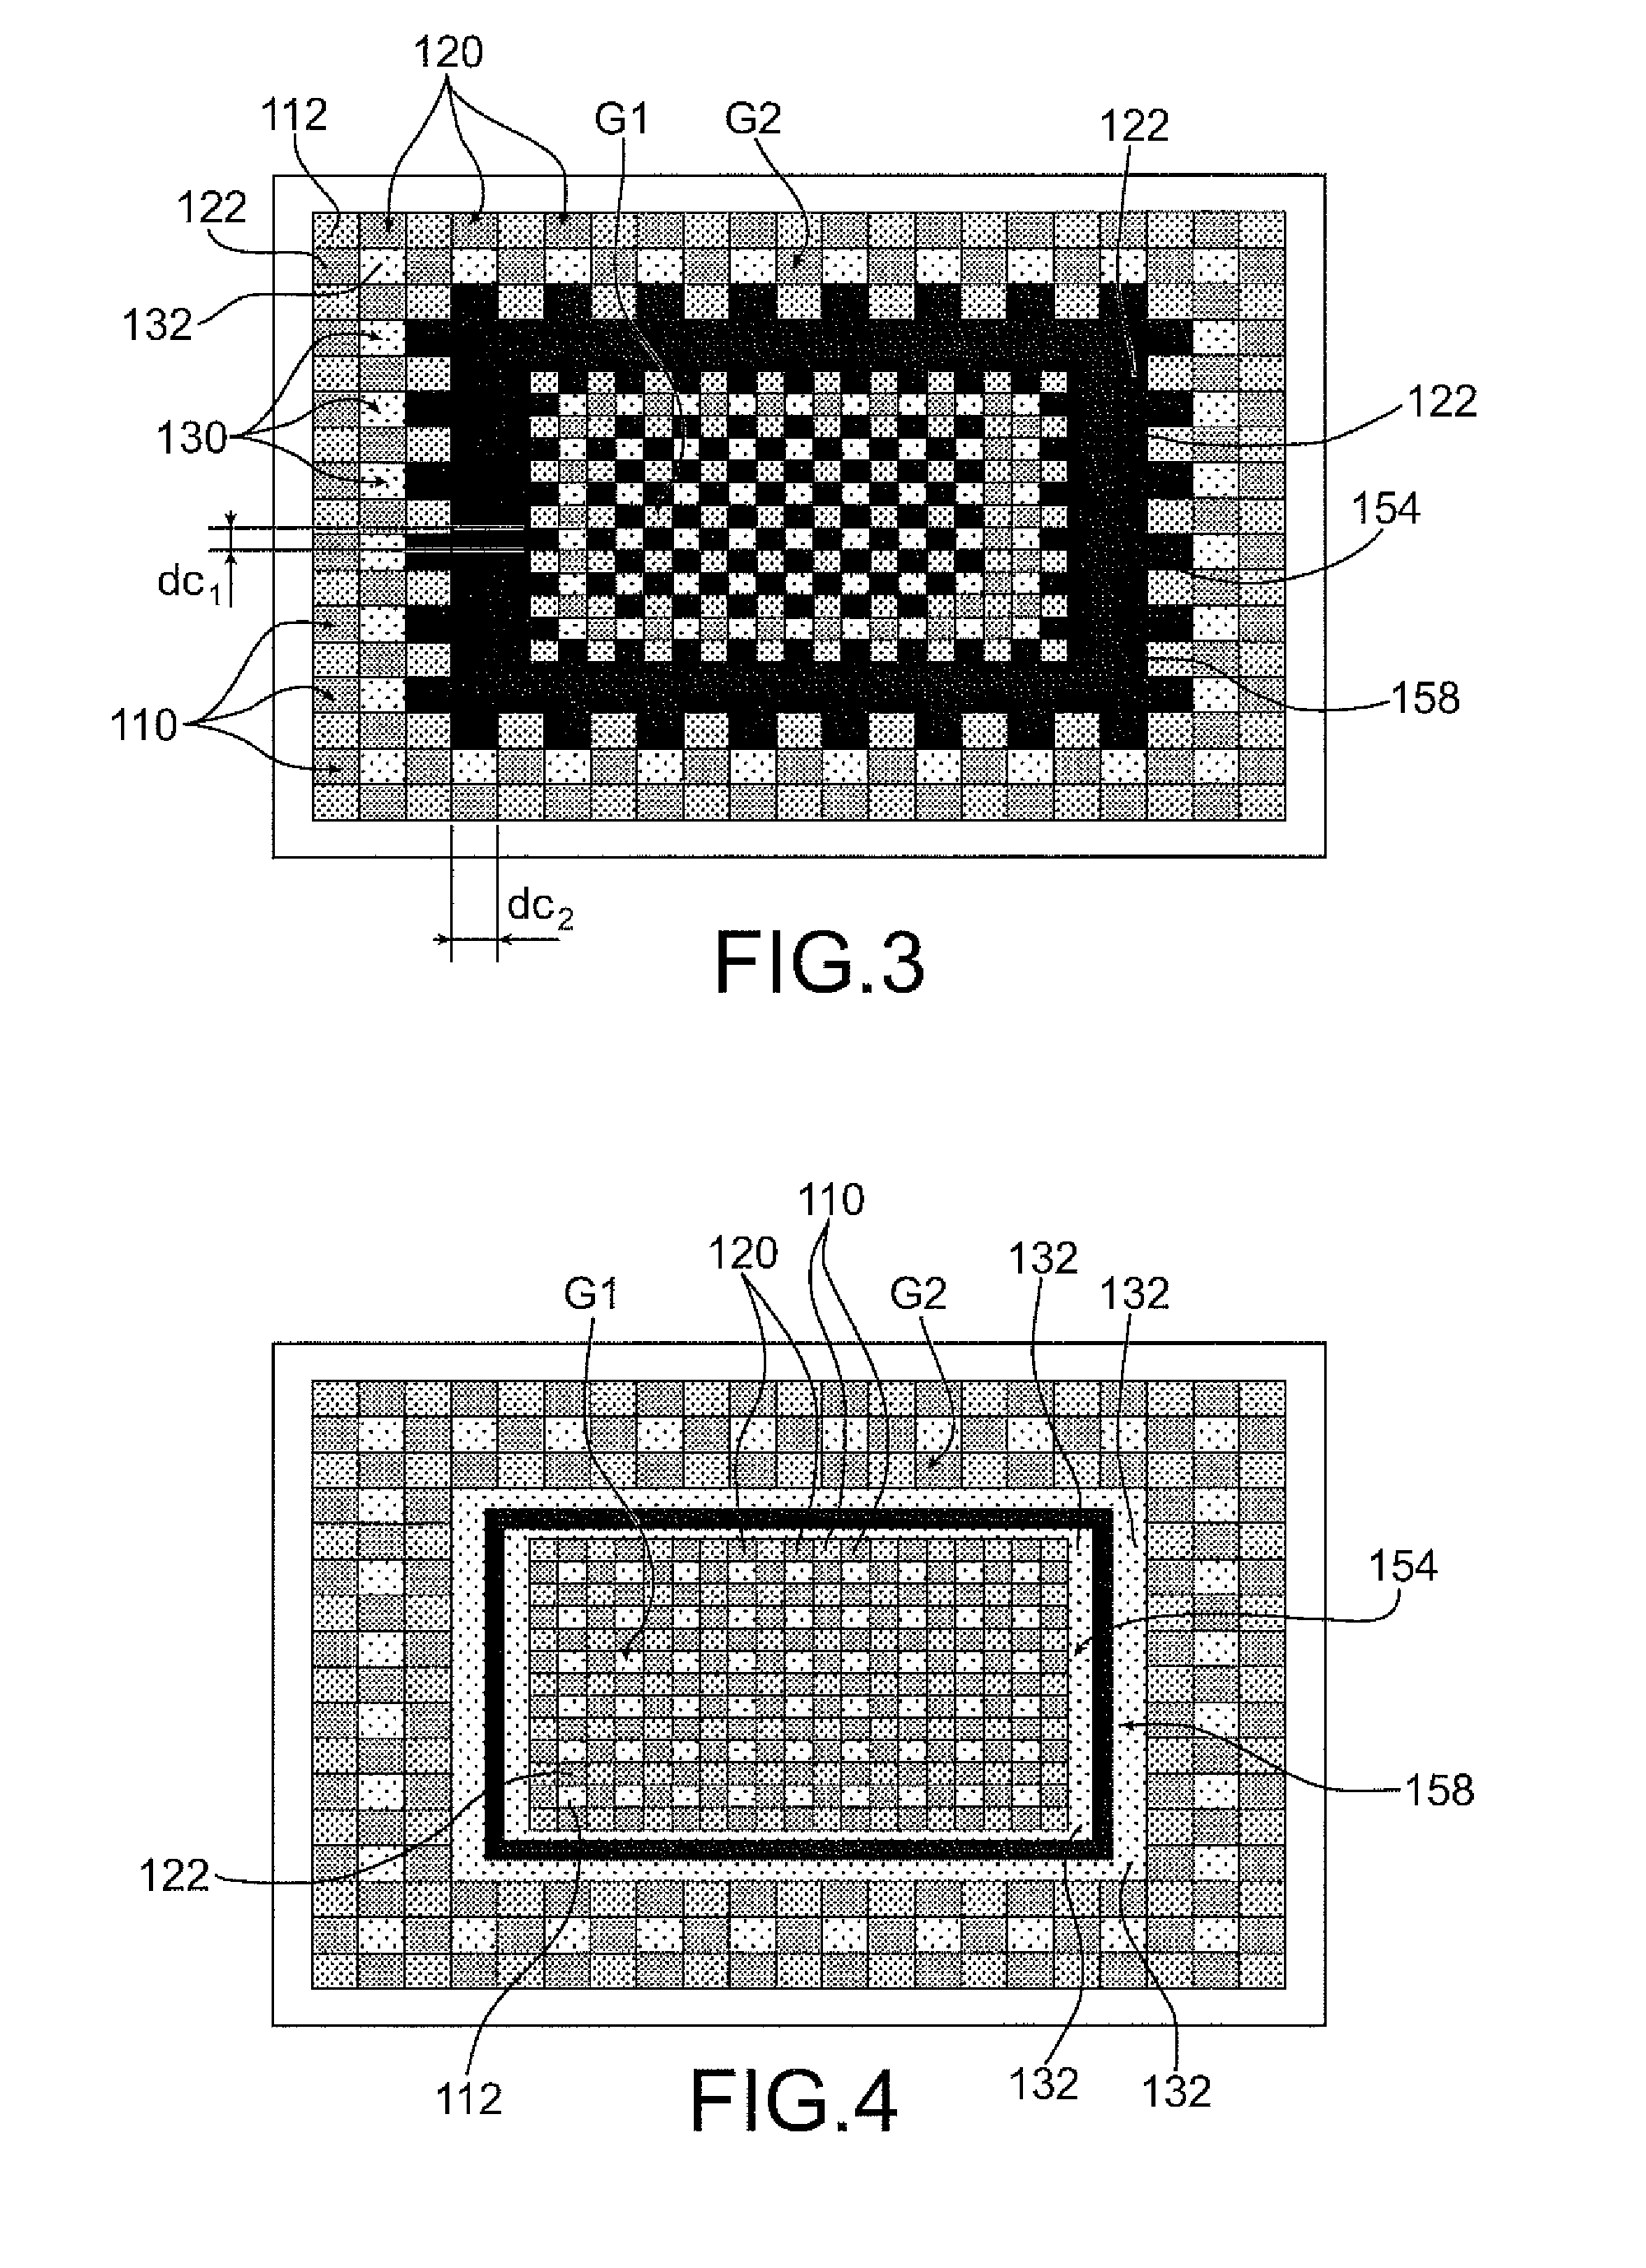 Production of an improved color filter on a microelectronic imaging device comprising a cavity